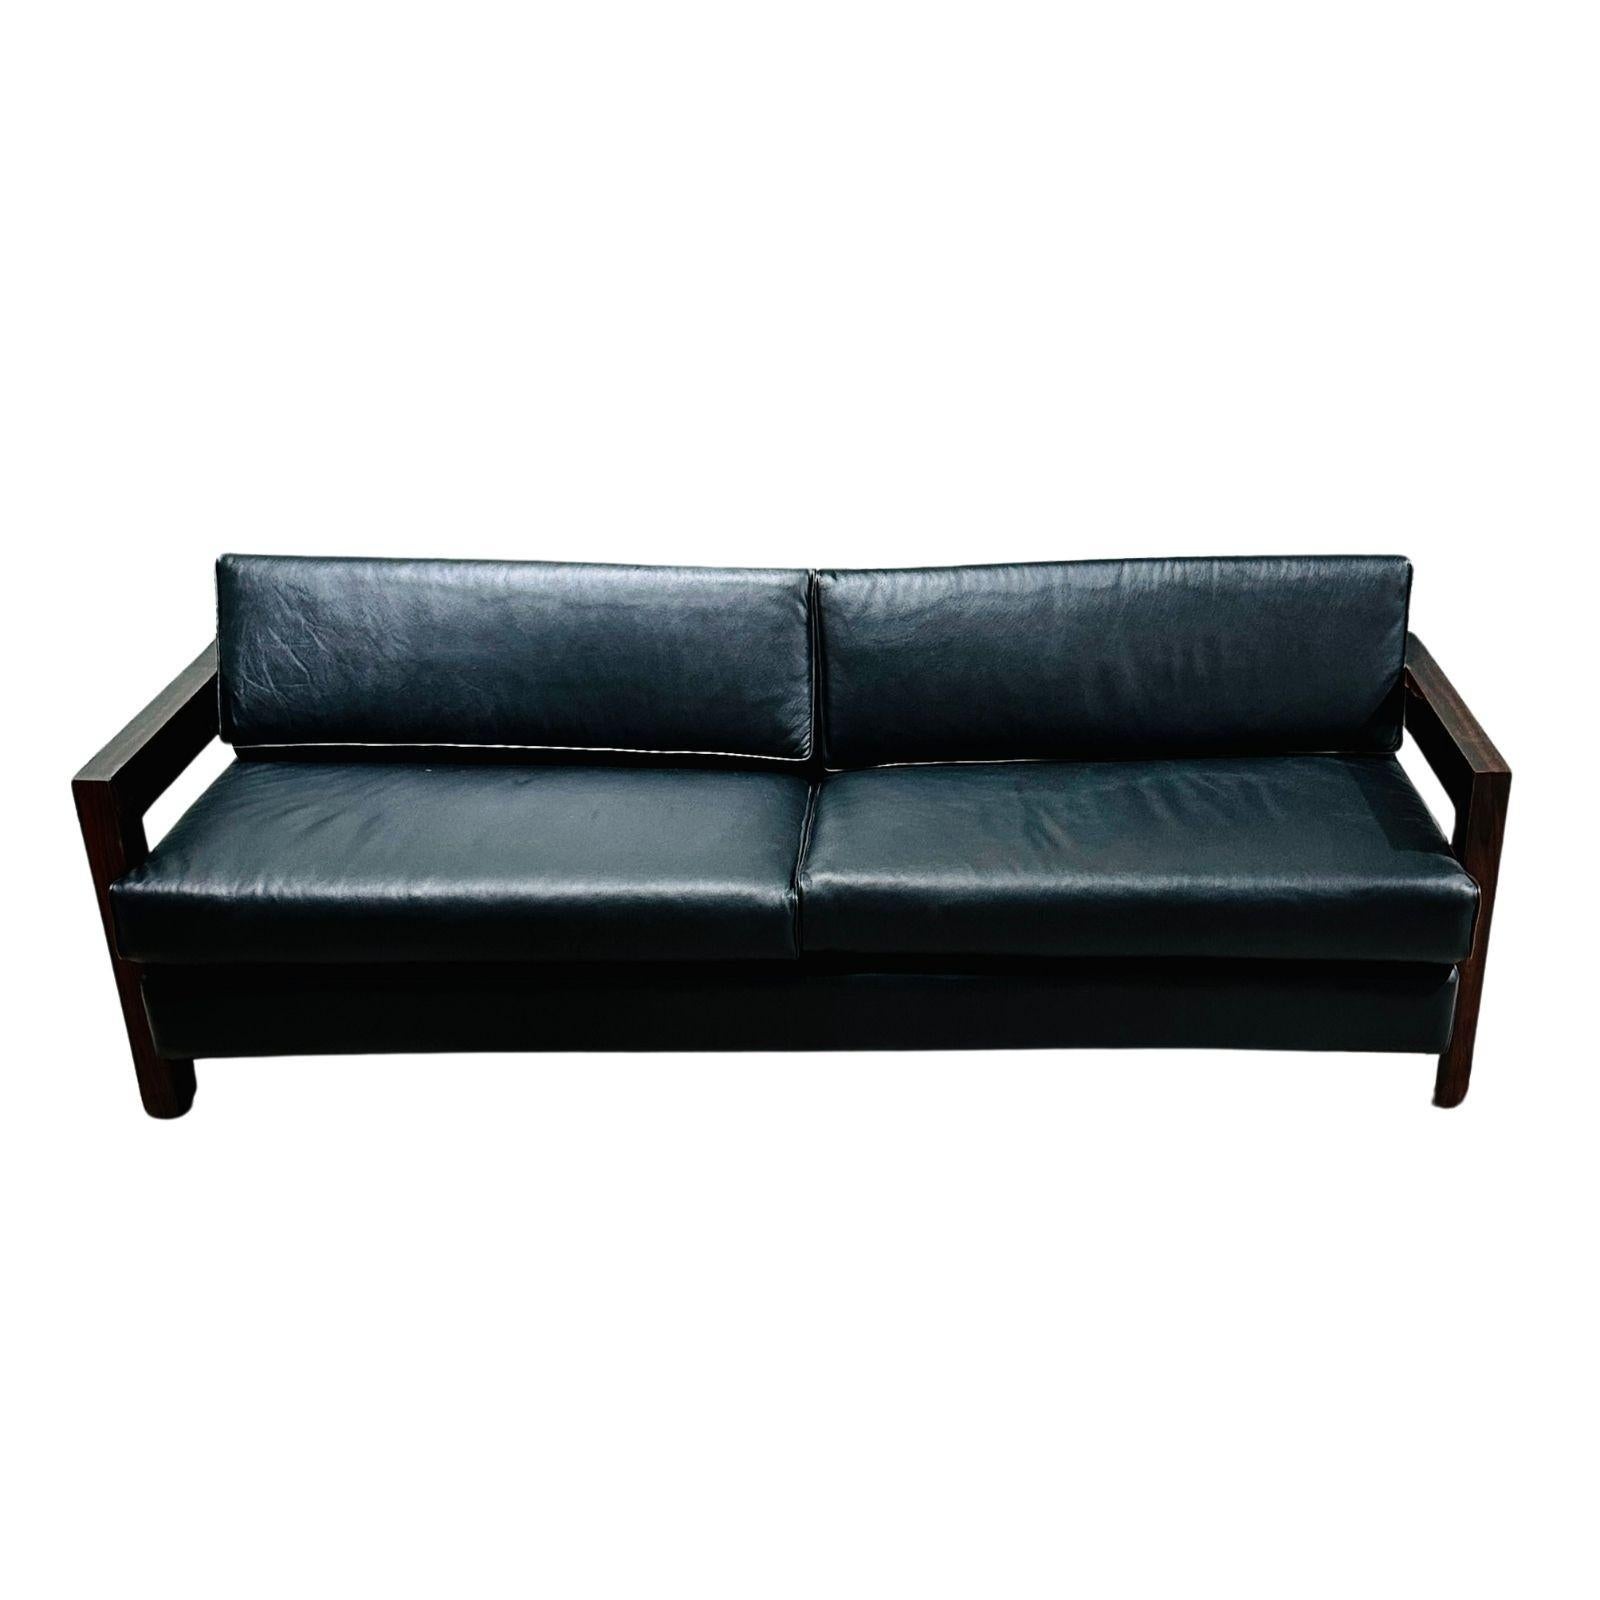 Brazilian rosewood sofa black leather, 1960. Completely restores and upholstered in black leather.
This piece is composed of solid rosewood structure, with cushions upholstered in black leather.
Sofa measures 87.5